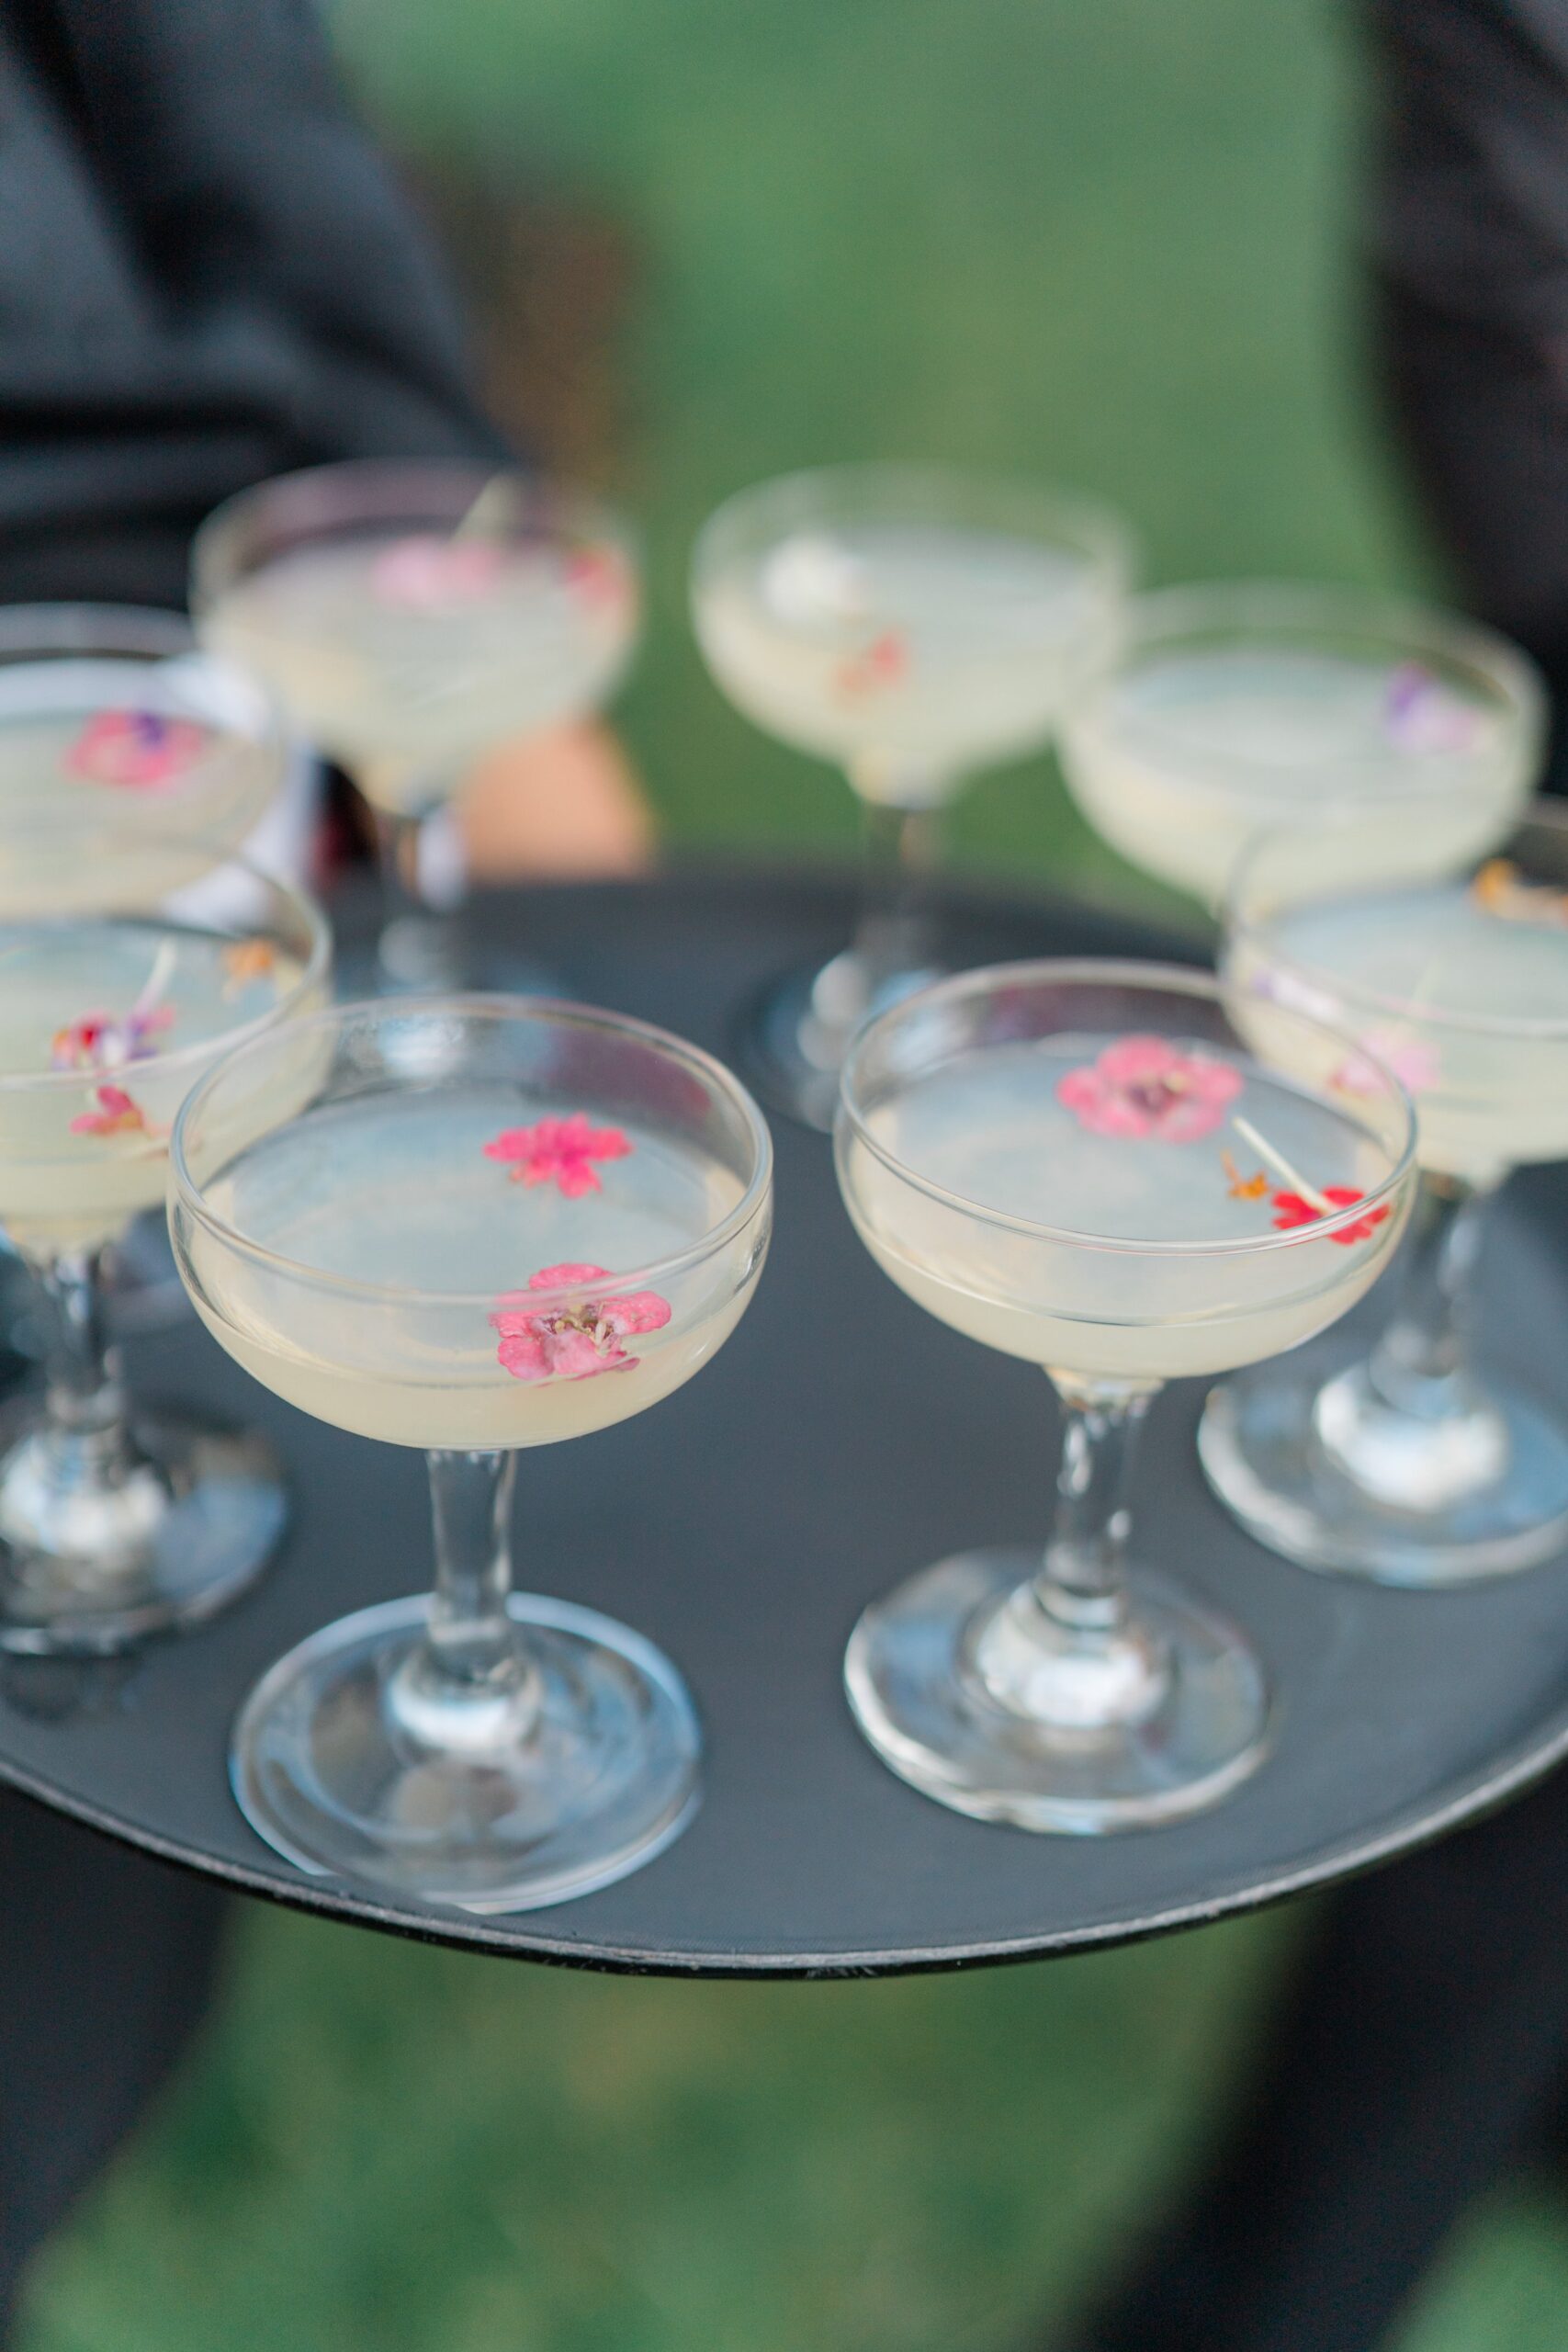 Cocktails with pink edible flowers at boston outdoor wedding reception